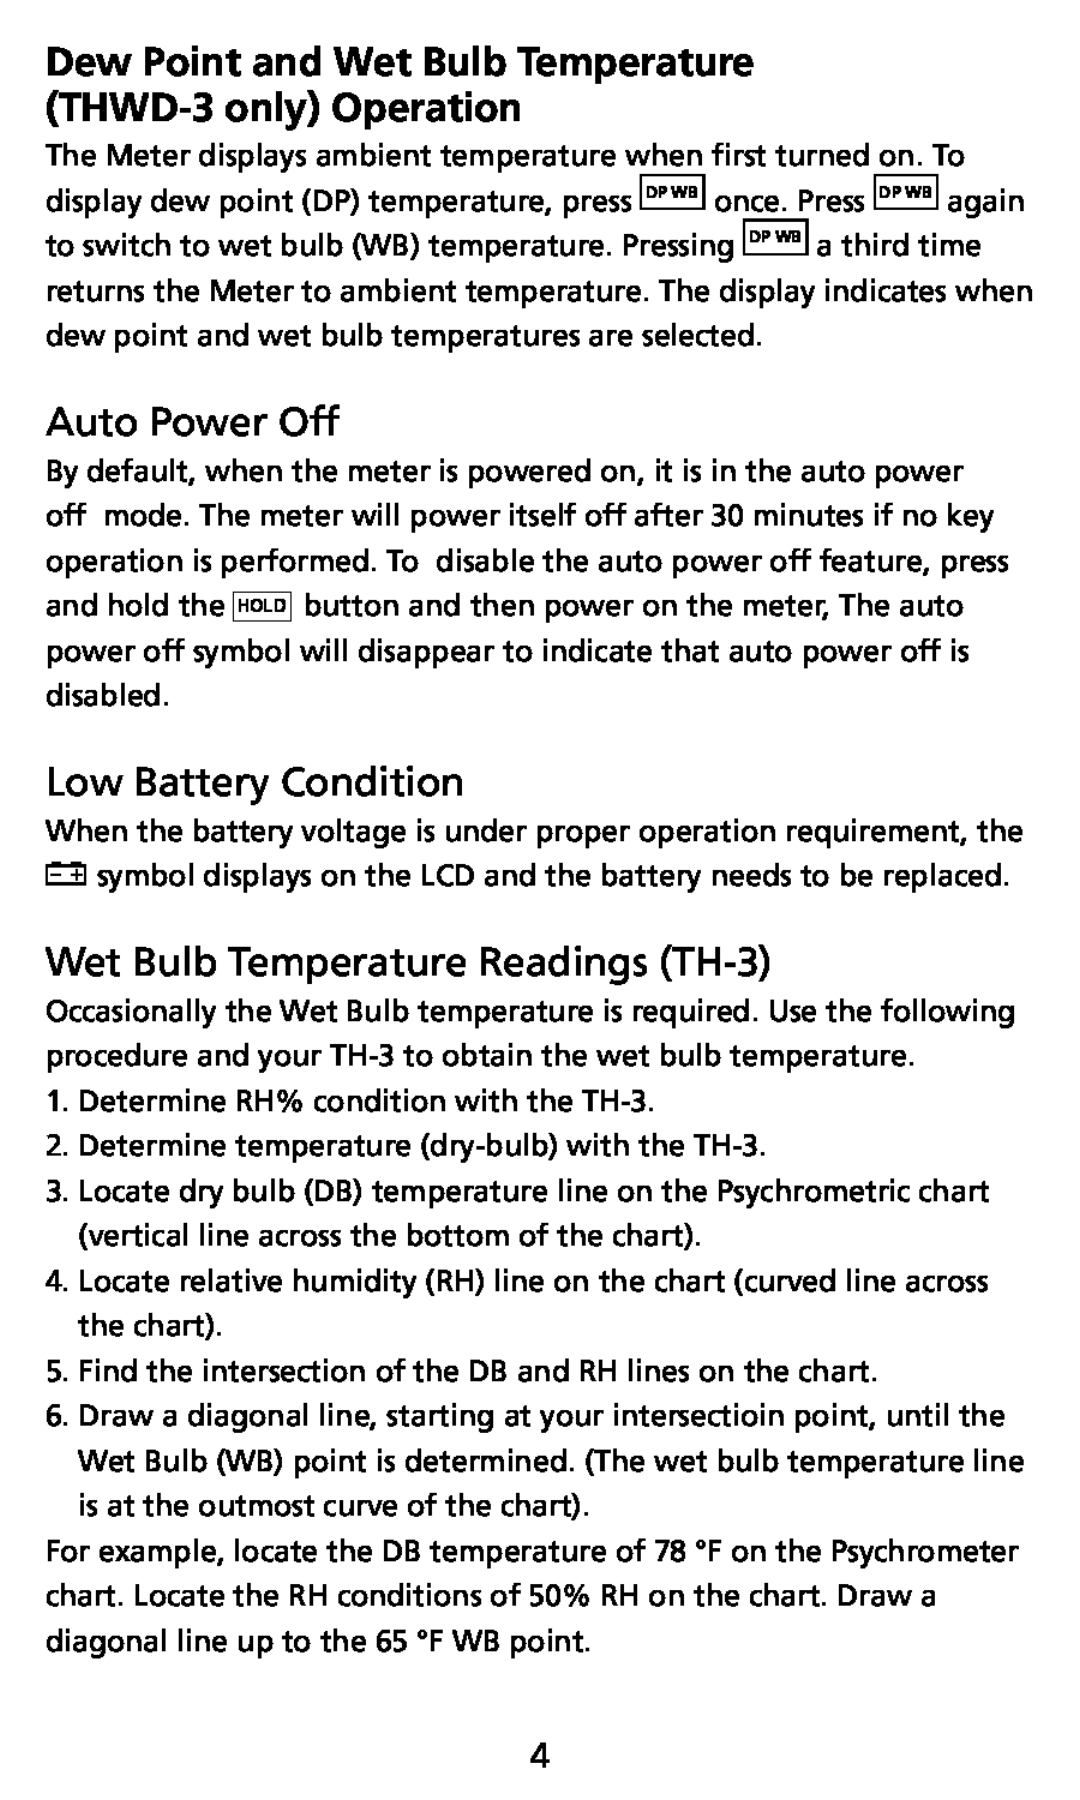 Ampro Corporation THWD-3 user manual Auto Power Off, Low Battery Condition, Wet Bulb Temperature Readings TH-3 